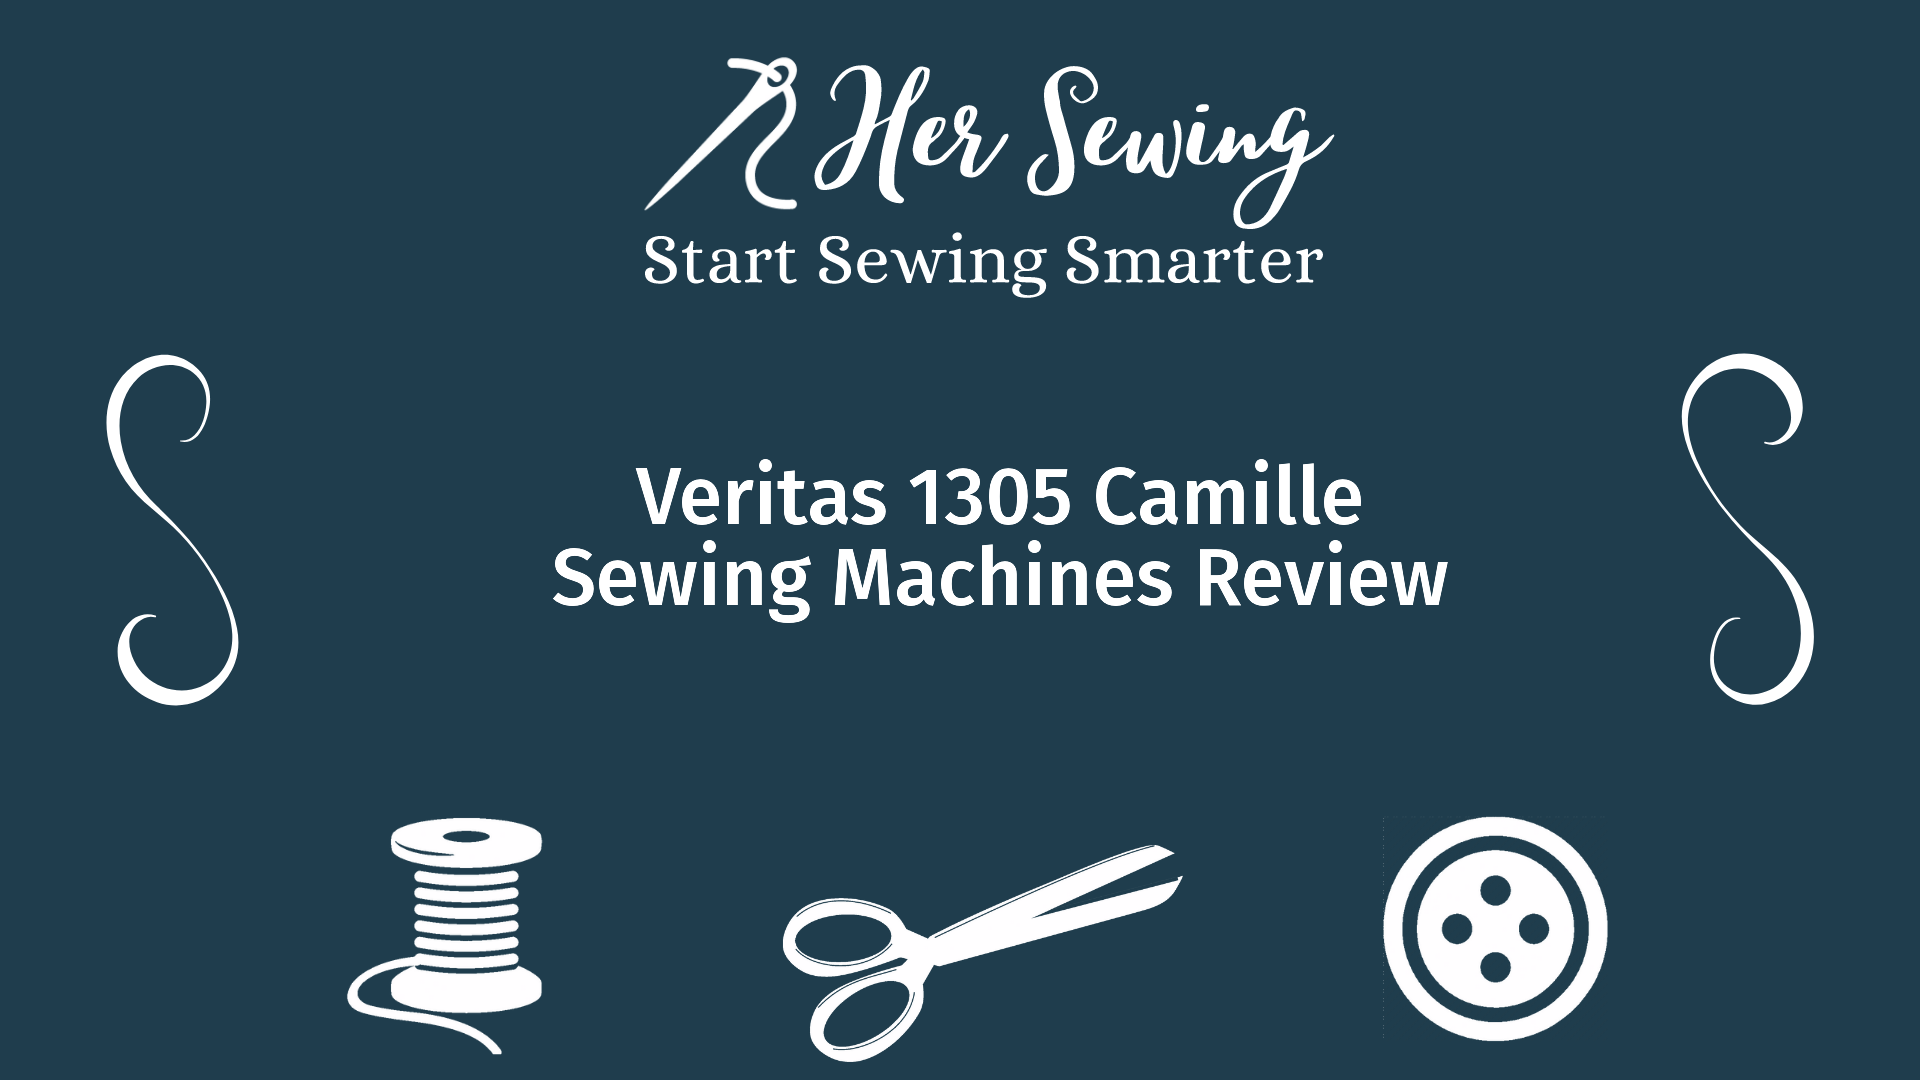 Veritas 1305 Camille Sewing Machines Review